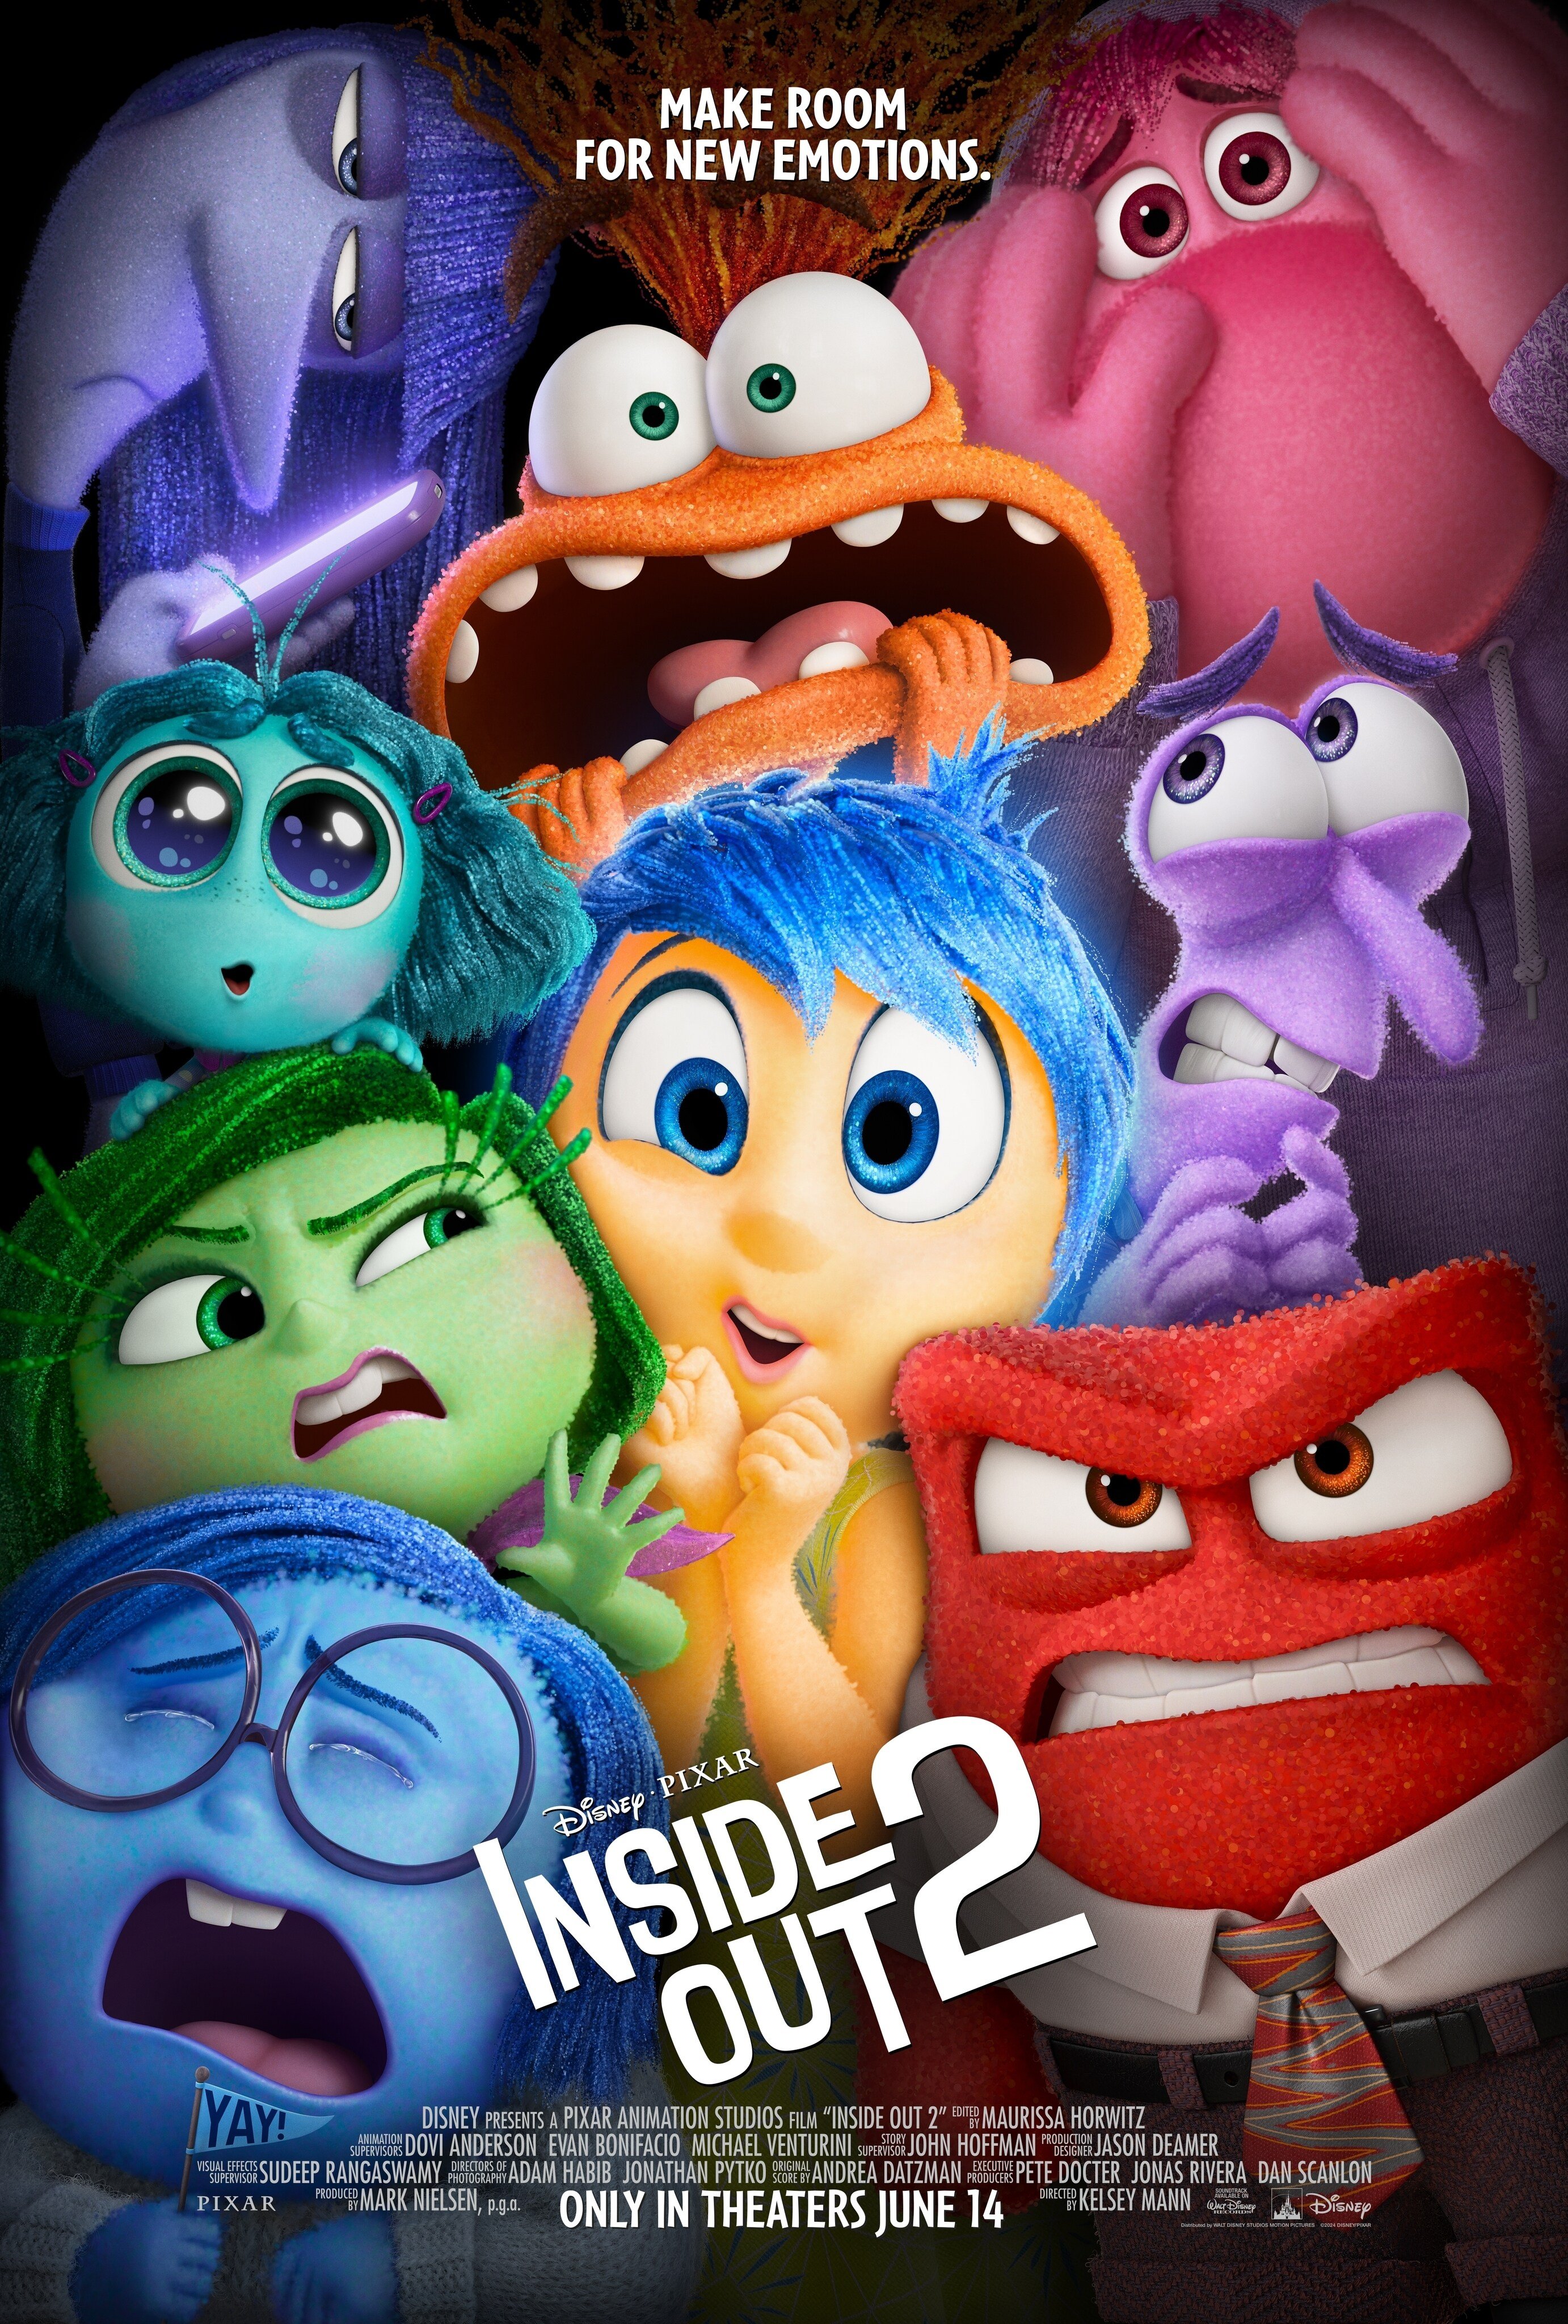 DISNEY AND PIXAR'S INSIDE OUT